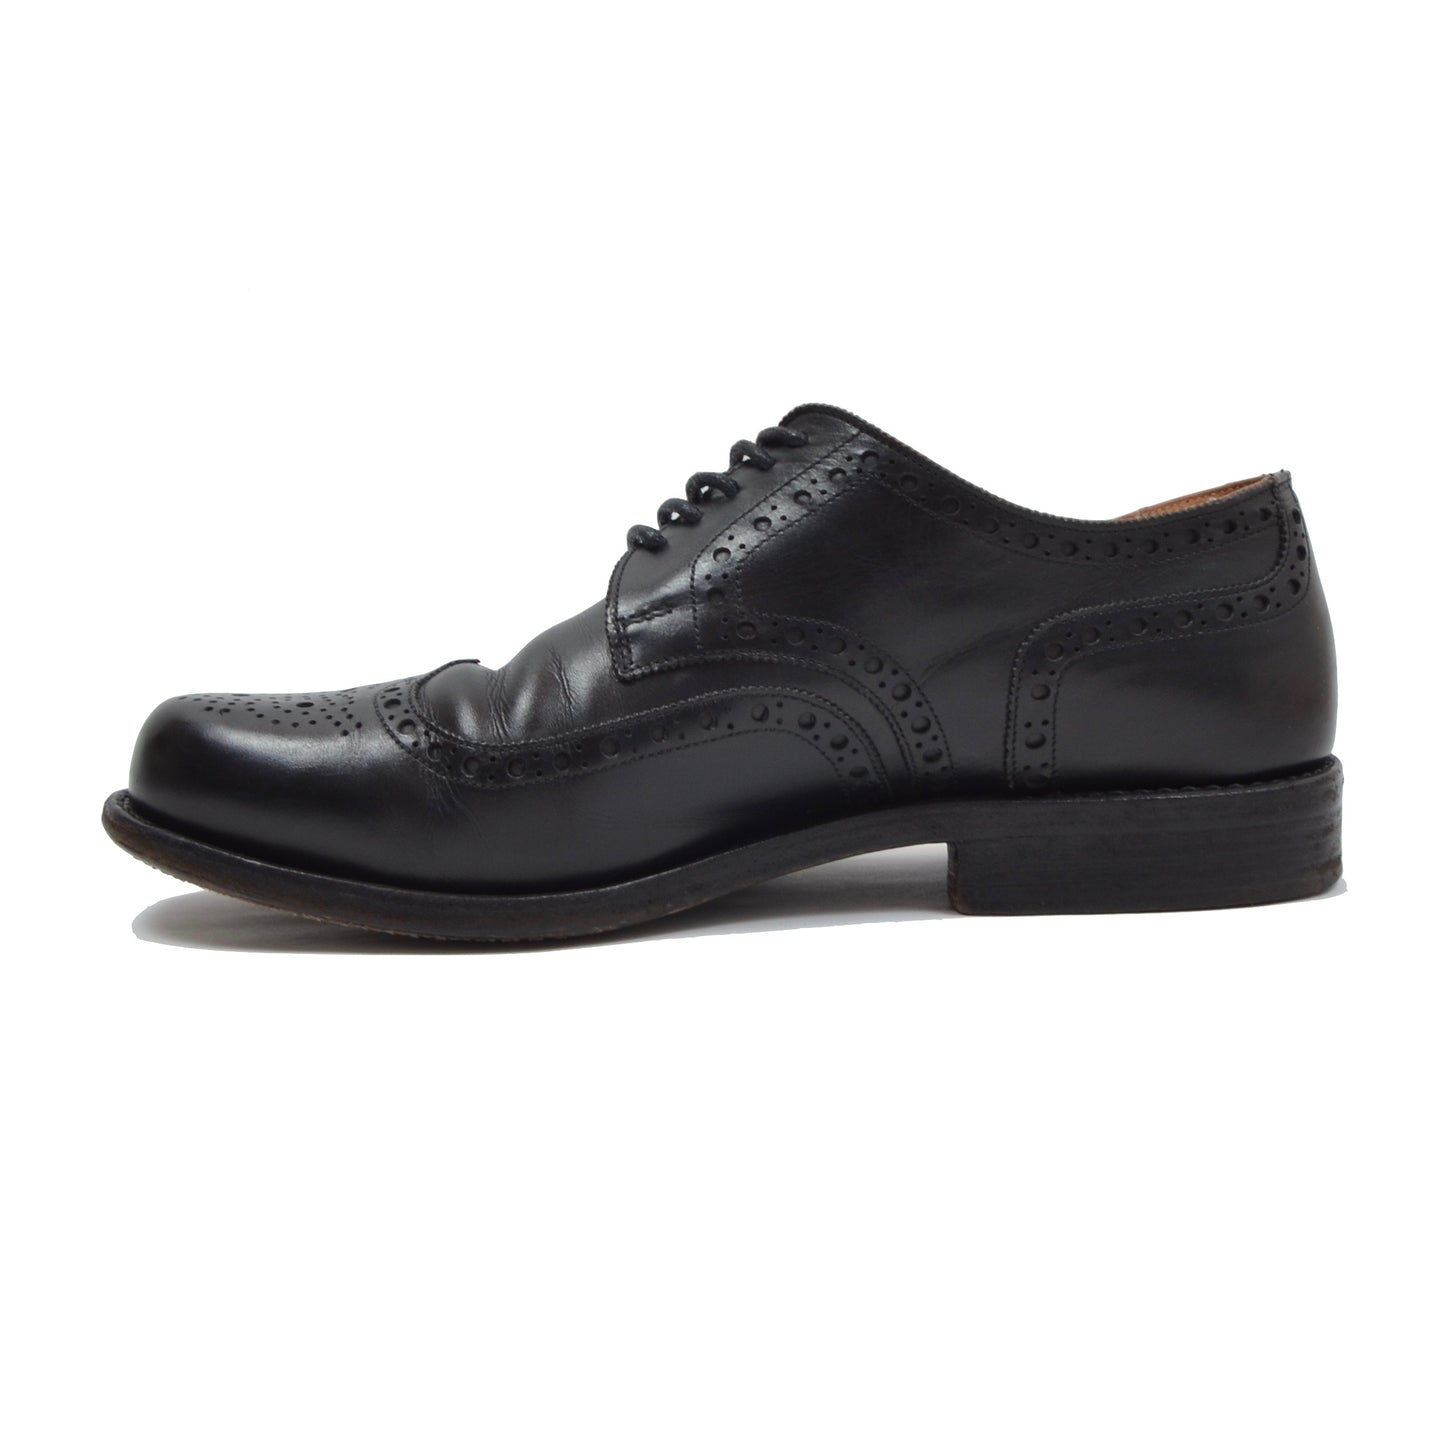 Ludwig Reiter Budapester Shoes Size 9 - Black